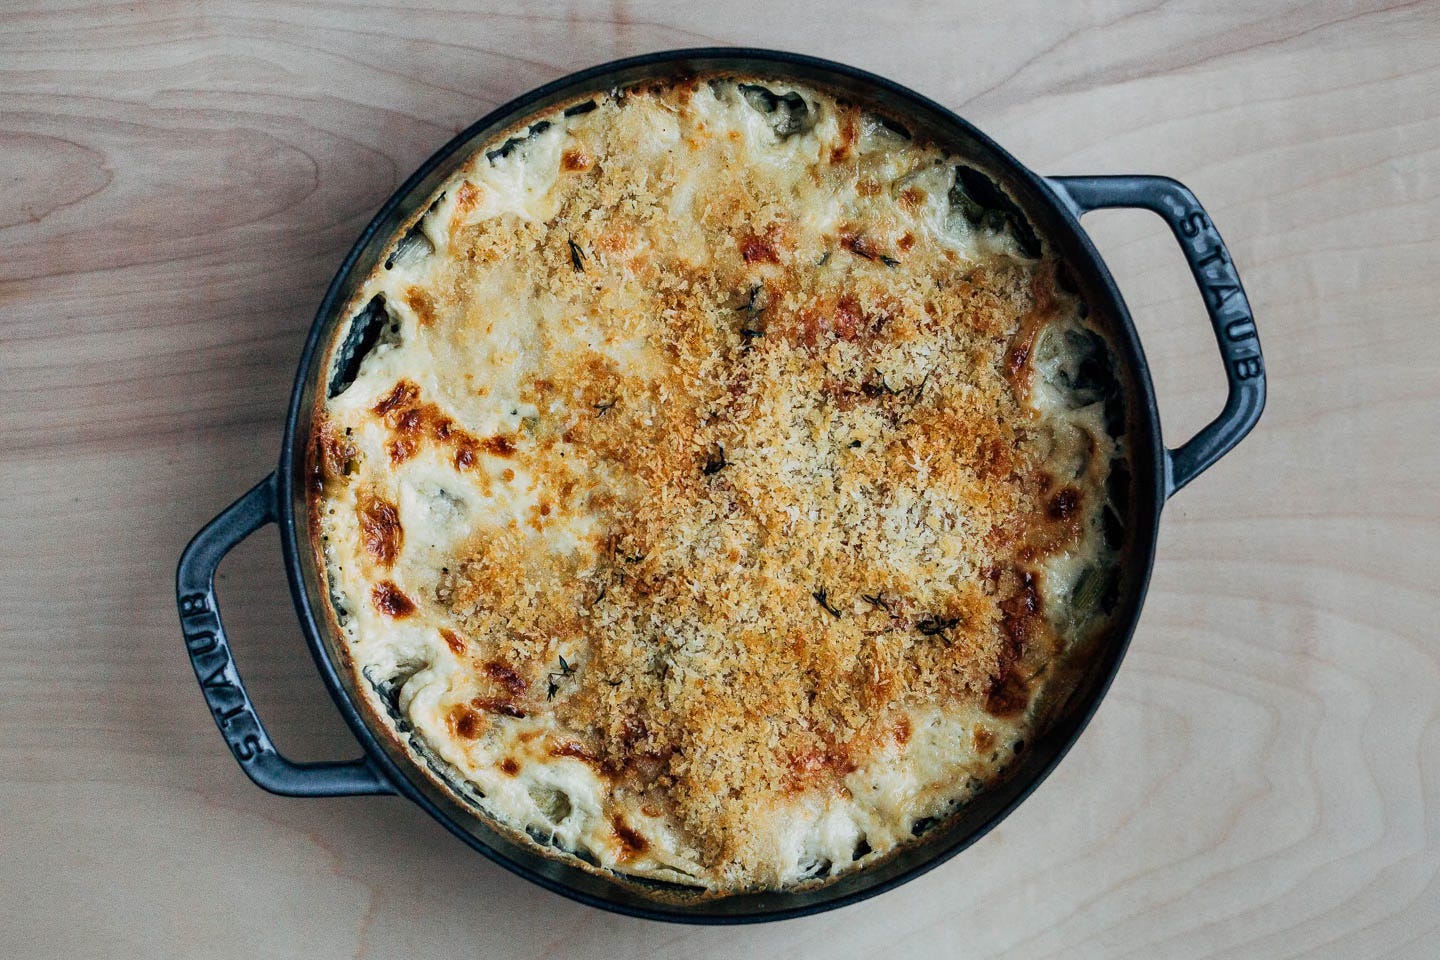 A baking dish of finished gratin with a golden panko top